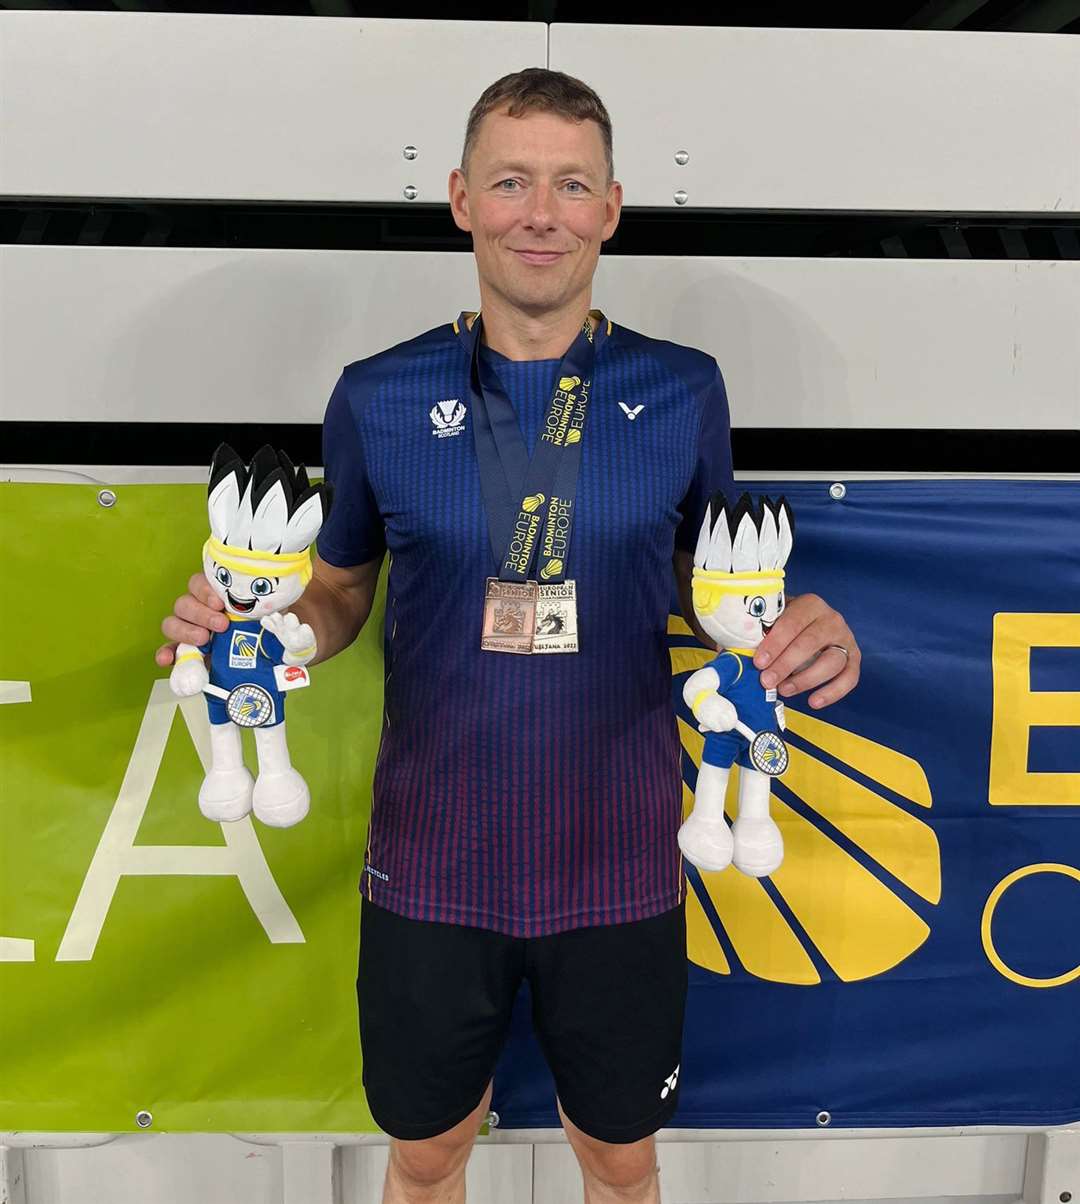 Mark Mackay with his silver and bronze medals at the European Senior Championships in Ljubljana.